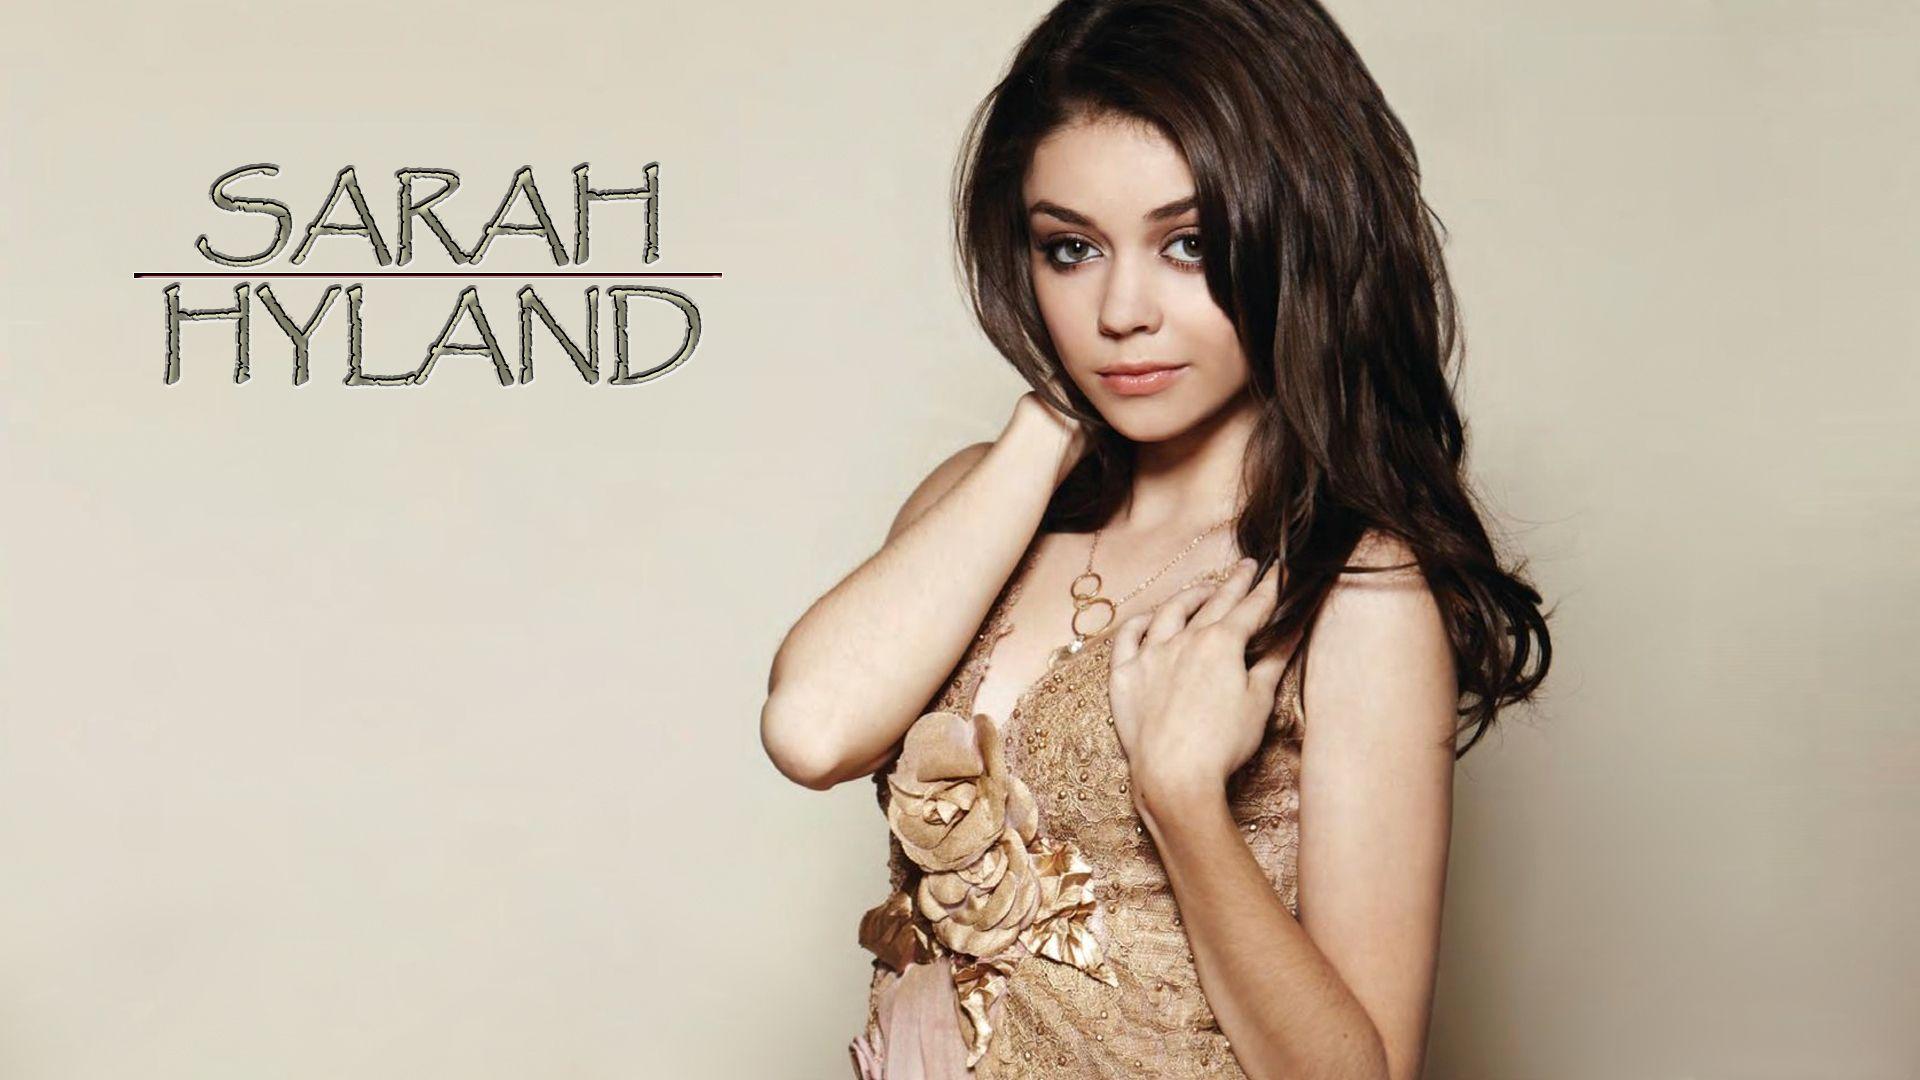 Sarah Hyland is an American actress, currently plays Haley Dunphy